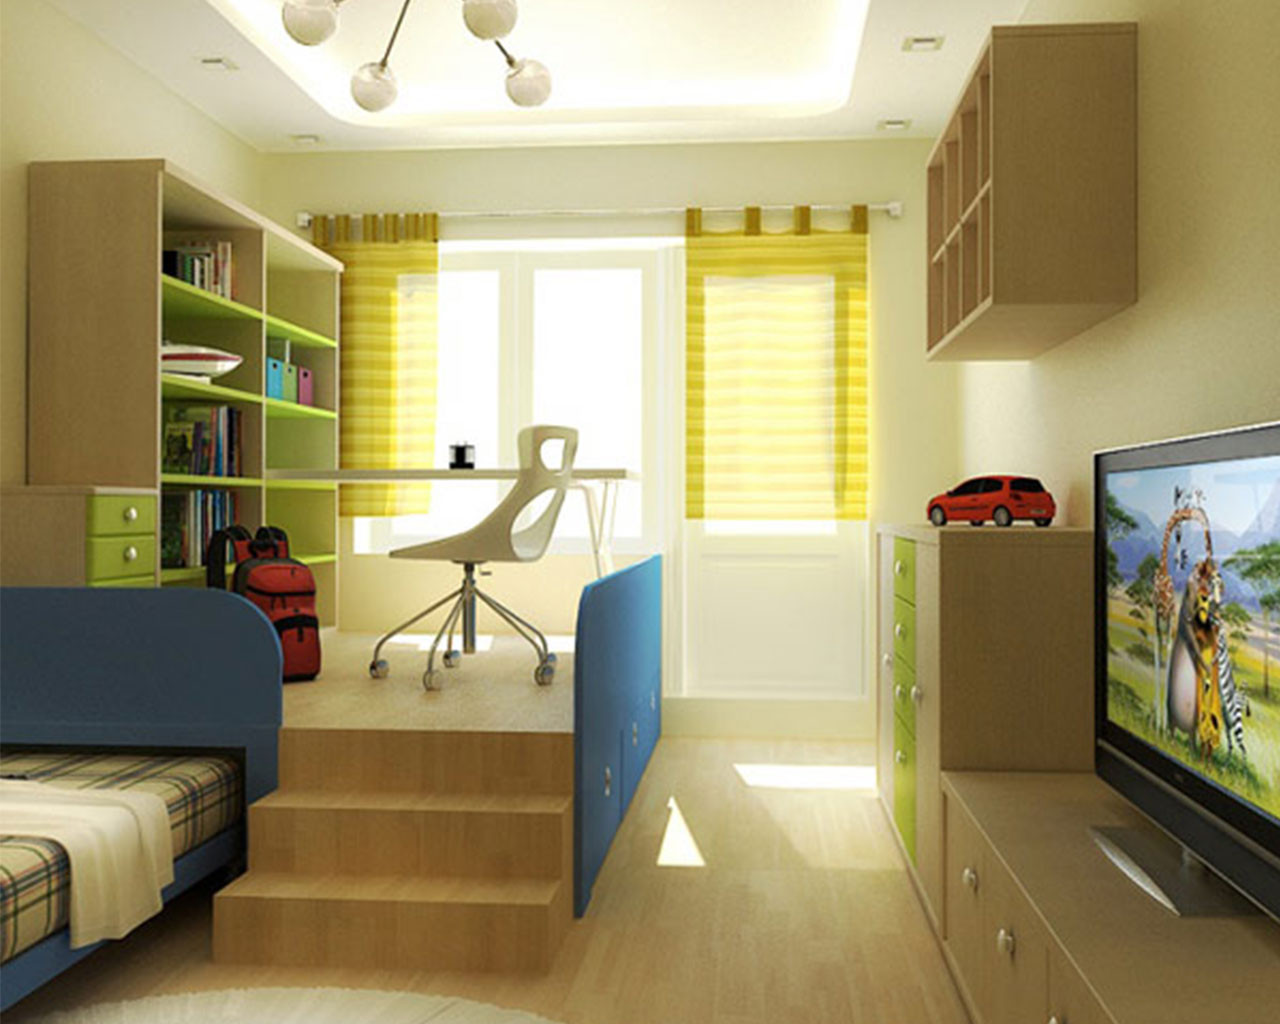 Awesome Boy Bedroom Ideas
 Cool Teenage Bedroom Ideas for Boys